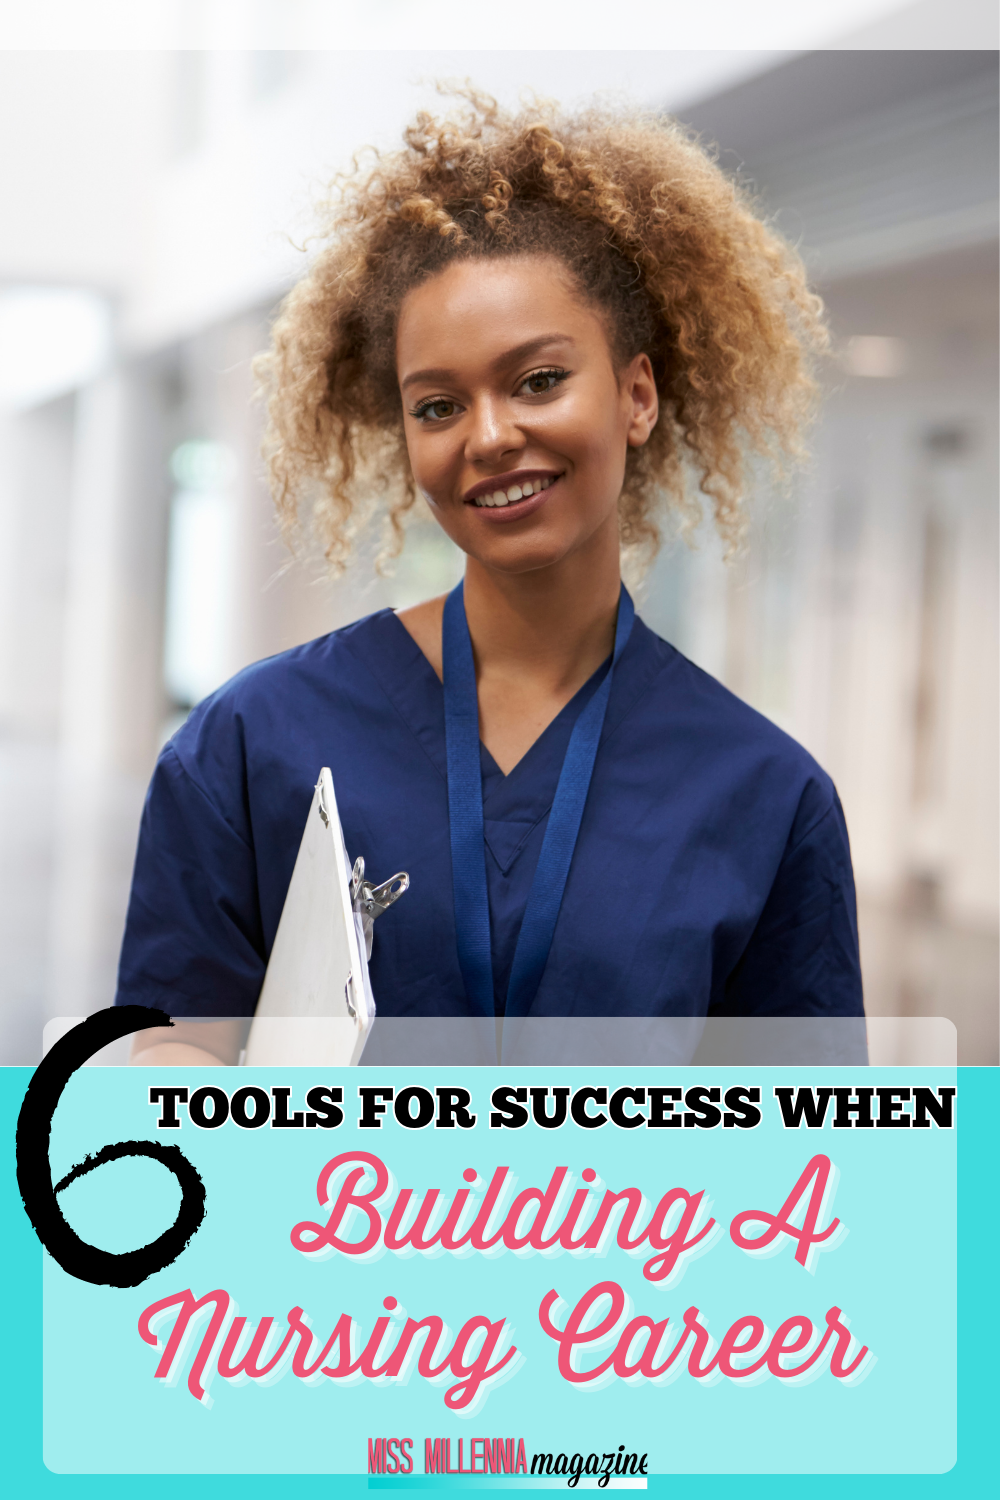 6 Tools For Success When Building A Nursing Career